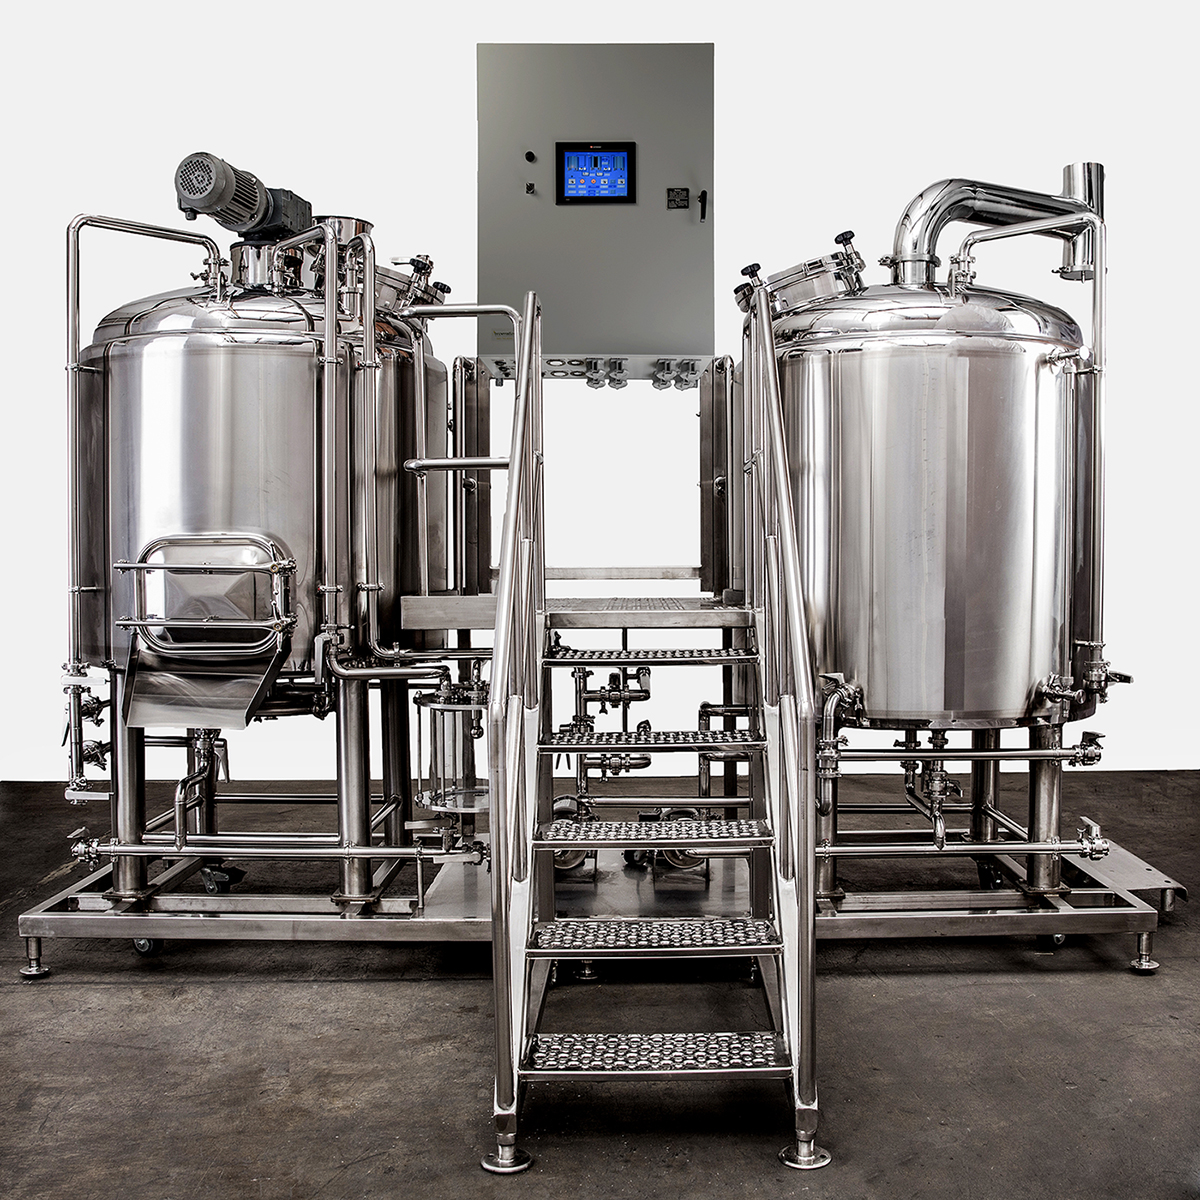 Which kind of grist hydrator you will use for brewhouse